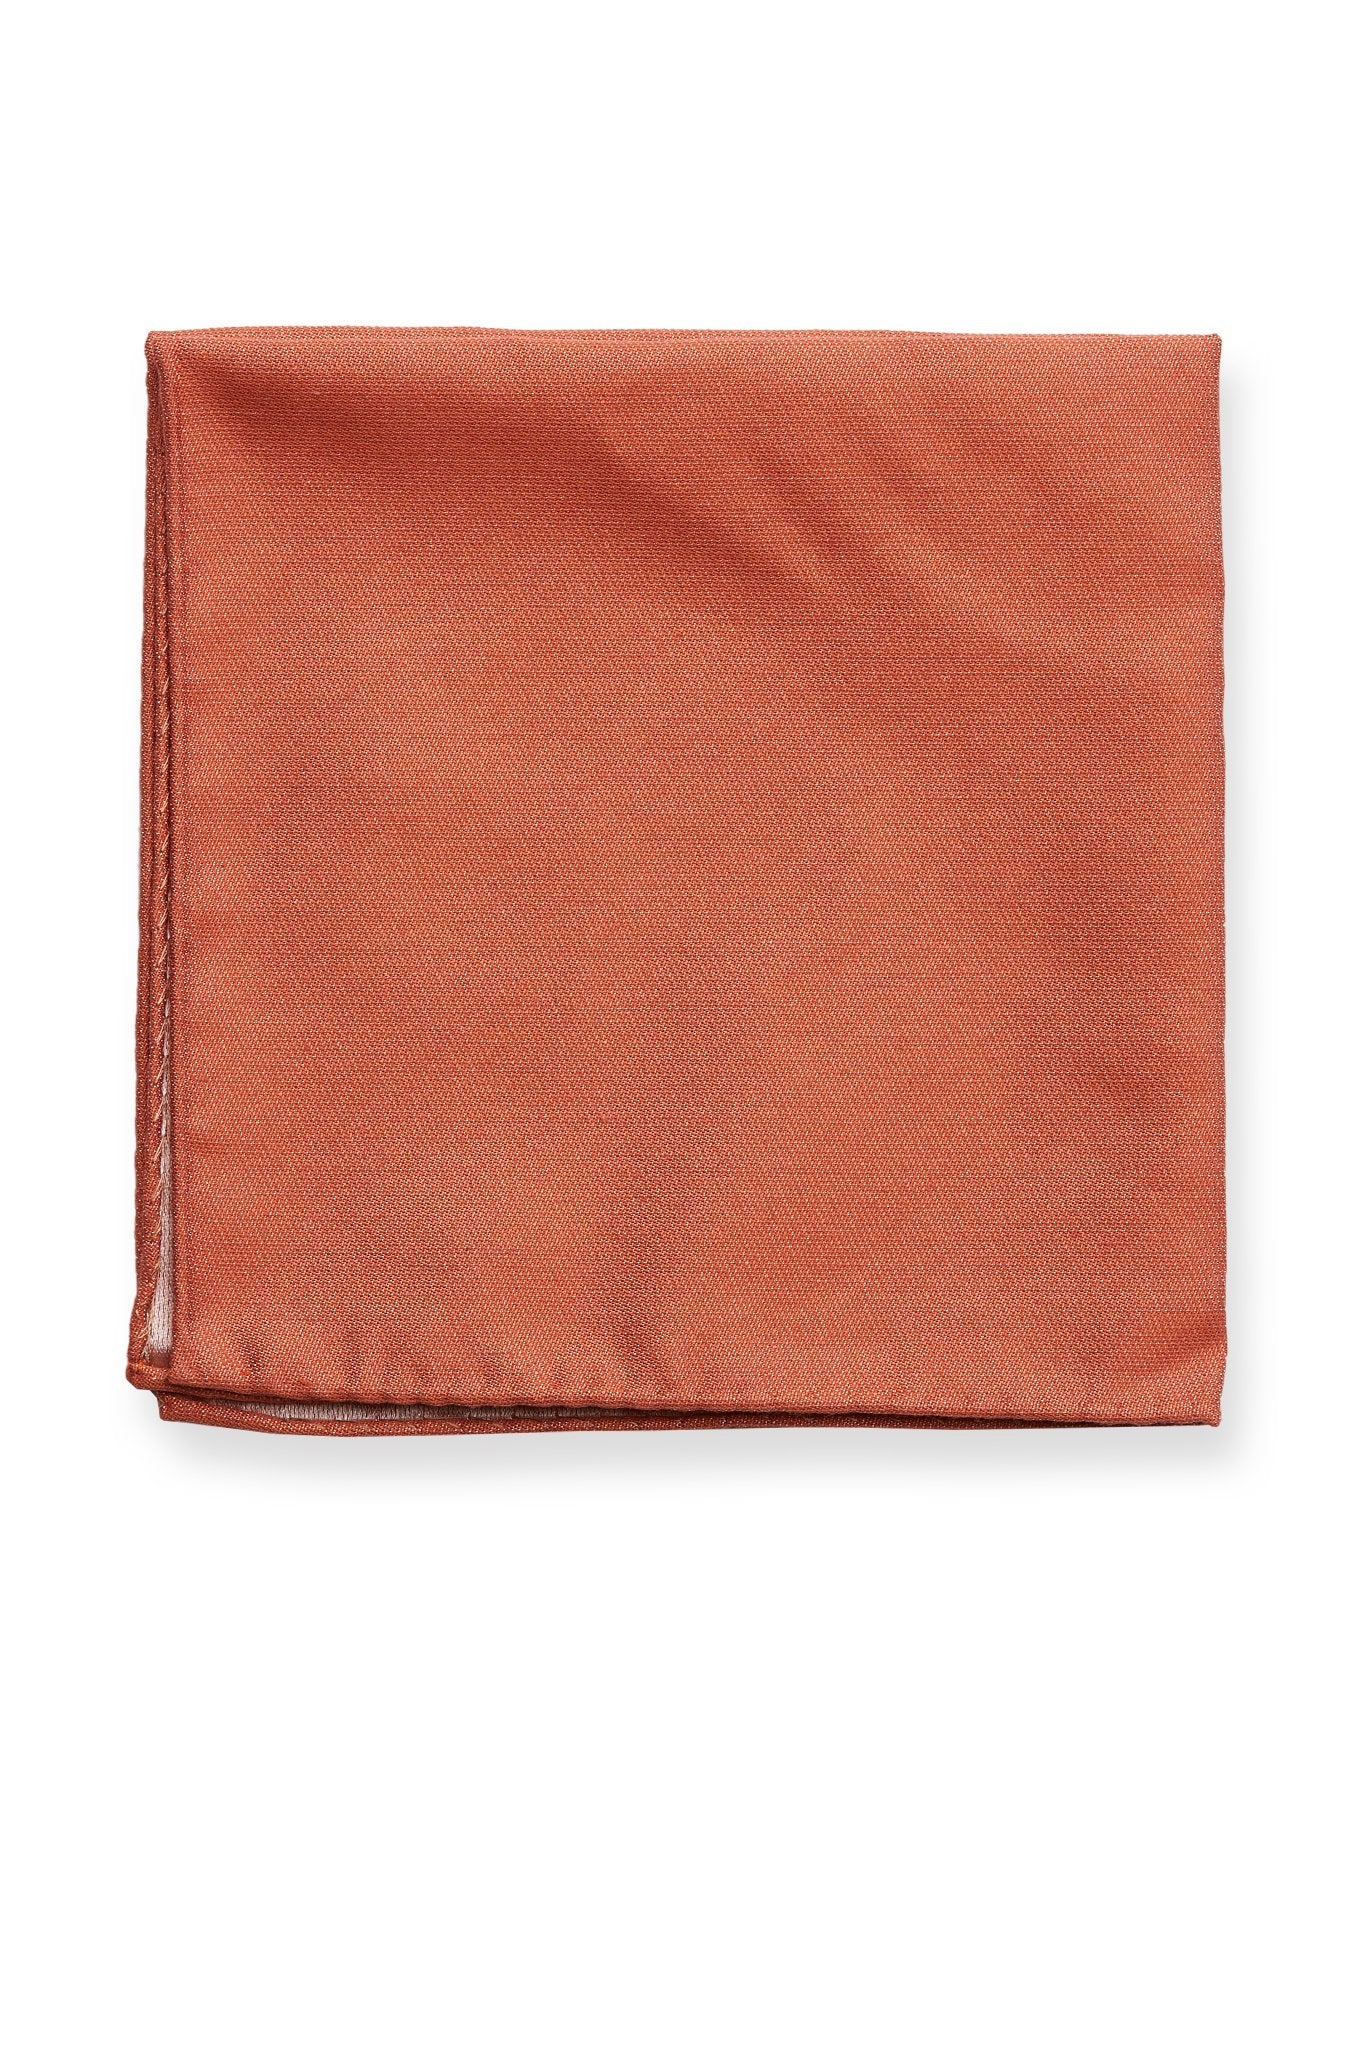 Didi Pocket Square in terracotta by Birdy Grey, front view